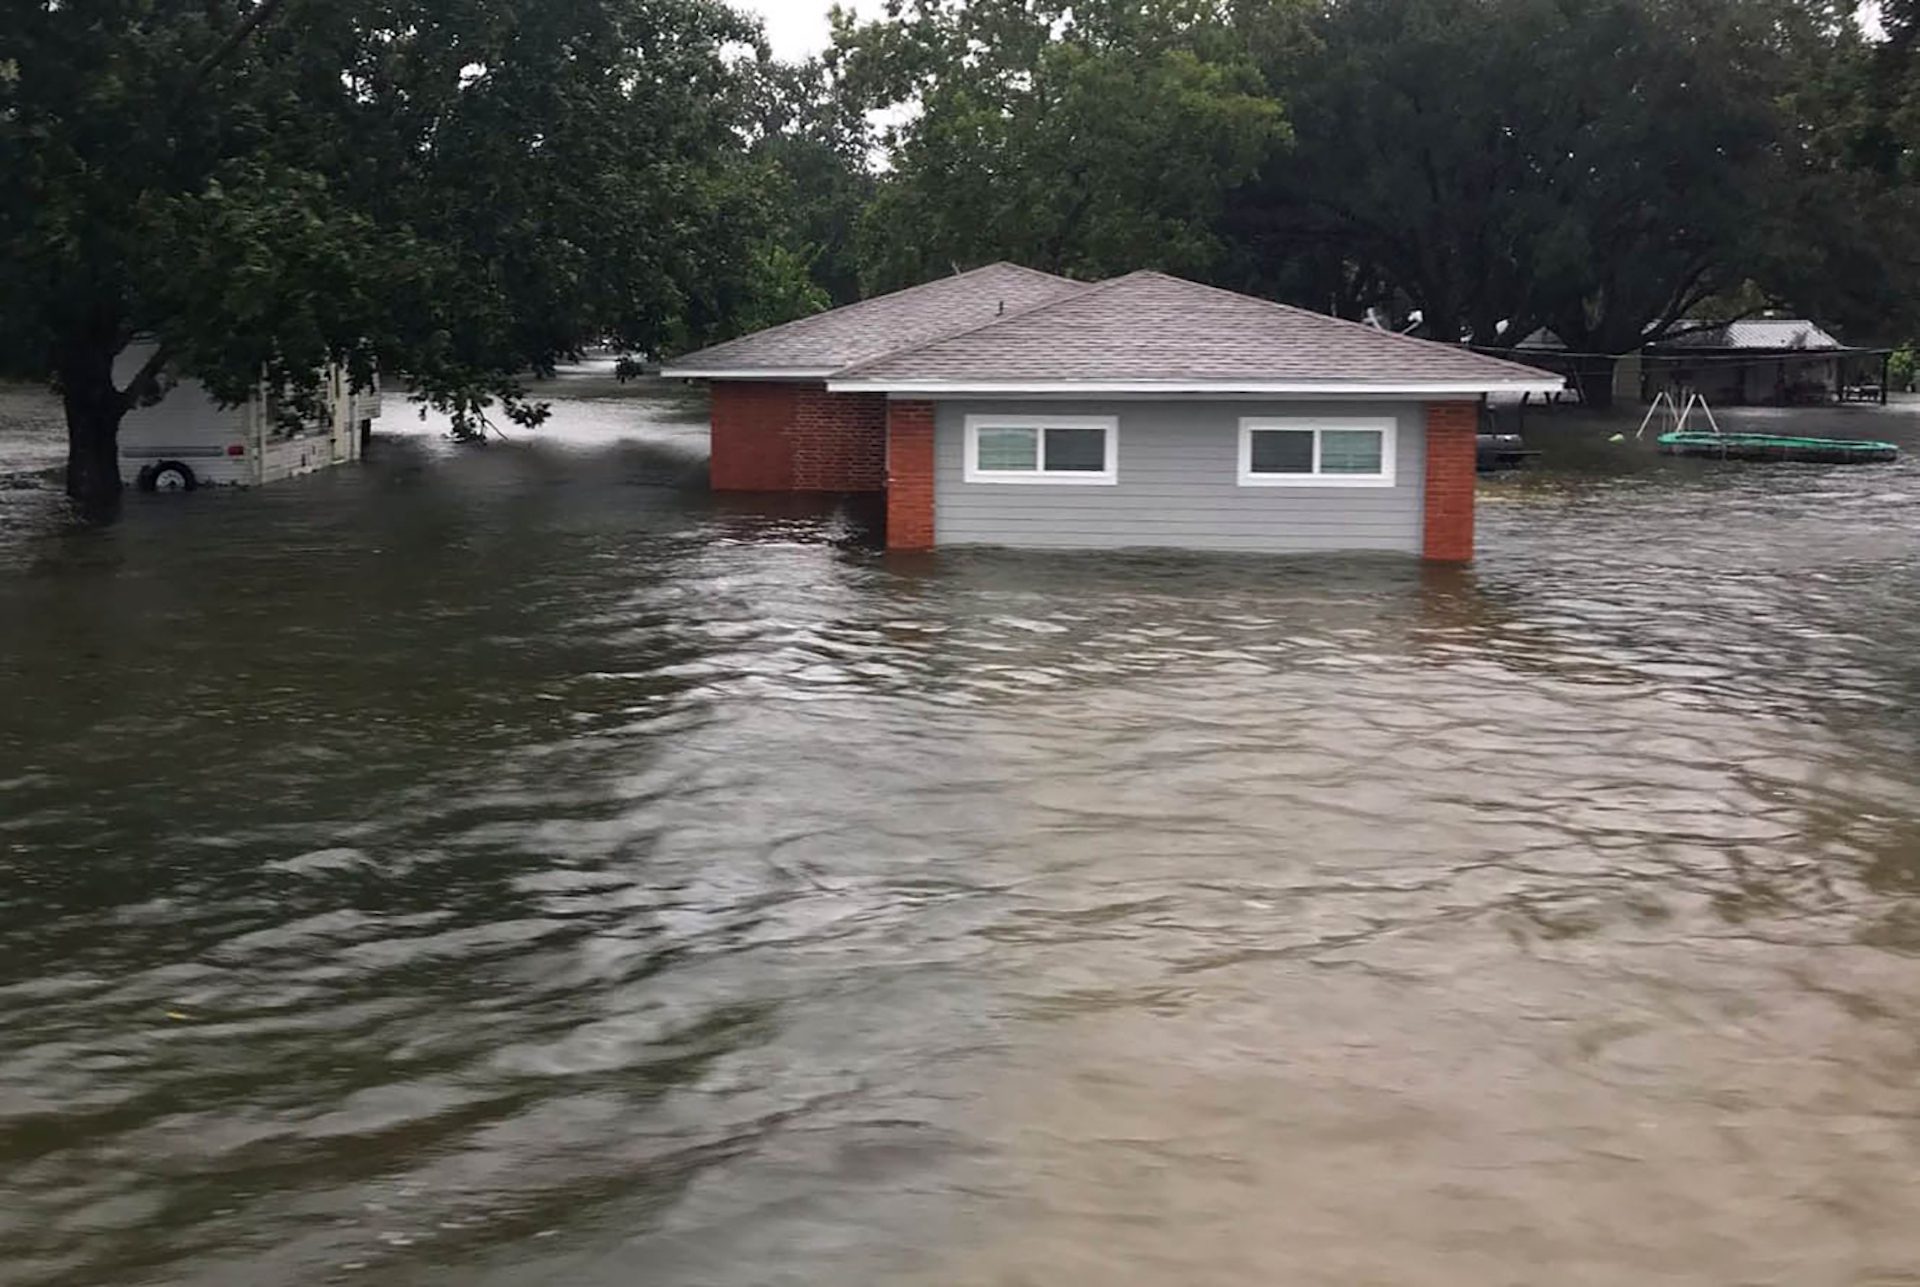 In this Sept.19, 2019, photo provided by the Chambers County Sheriff's Office, a flooded home is shown in Winnie, Texas. The area has experienced heavy flooding due to Tropical Depression Imelda.